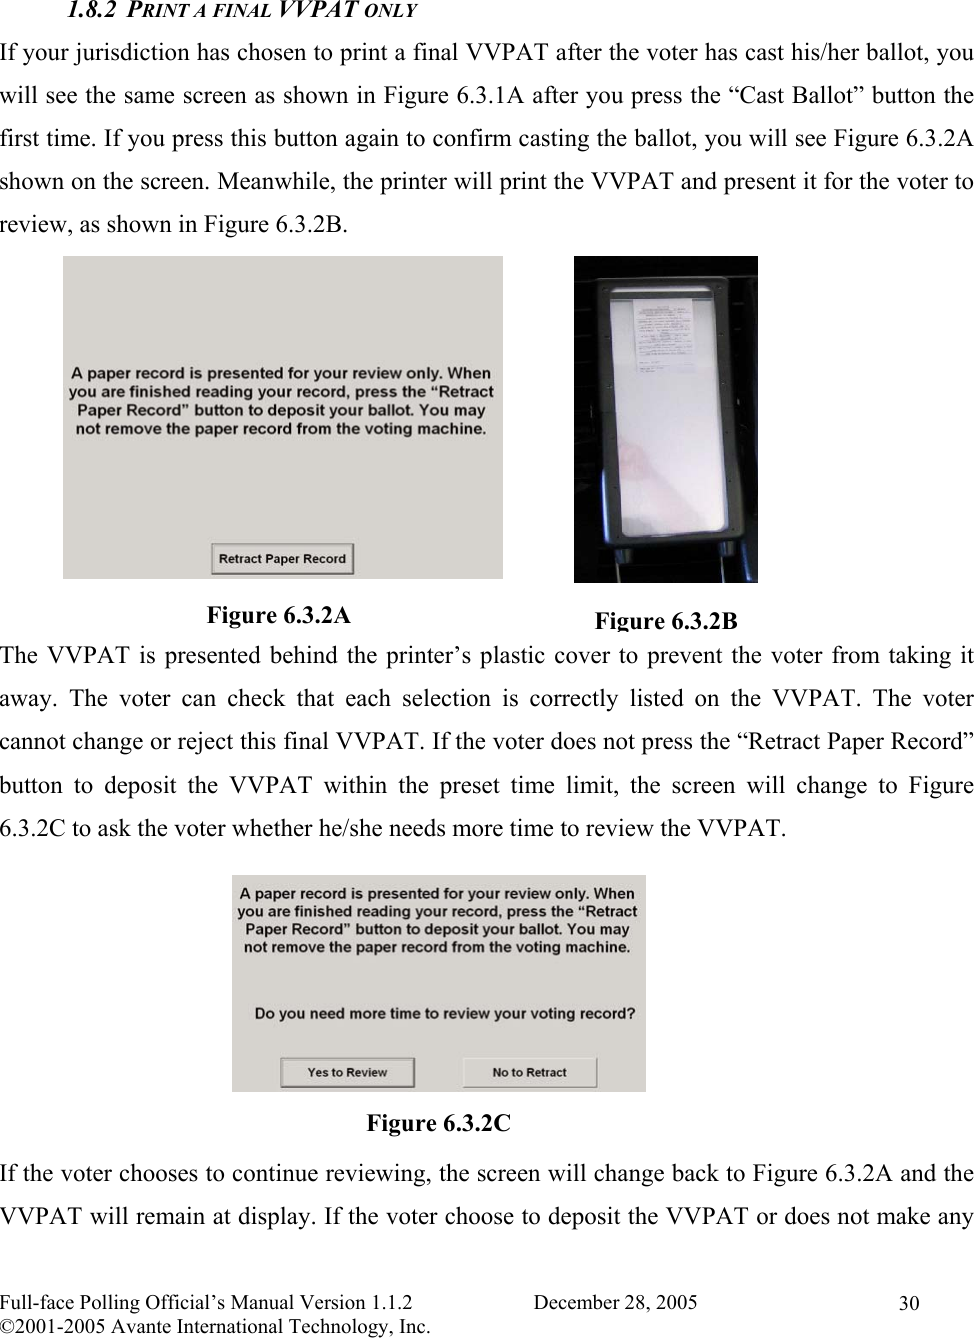    Full-face Polling Official’s Manual Version 1.1.2                       December 28, 2005 ©2001-2005 Avante International Technology, Inc.   30 1.8.2 PRINT A FINAL VVPAT ONLY If your jurisdiction has chosen to print a final VVPAT after the voter has cast his/her ballot, you will see the same screen as shown in Figure 6.3.1A after you press the “Cast Ballot” button the first time. If you press this button again to confirm casting the ballot, you will see Figure 6.3.2A shown on the screen. Meanwhile, the printer will print the VVPAT and present it for the voter to review, as shown in Figure 6.3.2B.           The VVPAT is presented behind the printer’s plastic cover to prevent the voter from taking it away. The voter can check that each selection is correctly listed on the VVPAT. The voter cannot change or reject this final VVPAT. If the voter does not press the “Retract Paper Record” button to deposit the VVPAT within the preset time limit, the screen will change to Figure 6.3.2C to ask the voter whether he/she needs more time to review the VVPAT.        If the voter chooses to continue reviewing, the screen will change back to Figure 6.3.2A and the VVPAT will remain at display. If the voter choose to deposit the VVPAT or does not make any Figure 6.3.2A  Figure 6.3.2BFigure 6.3.2C